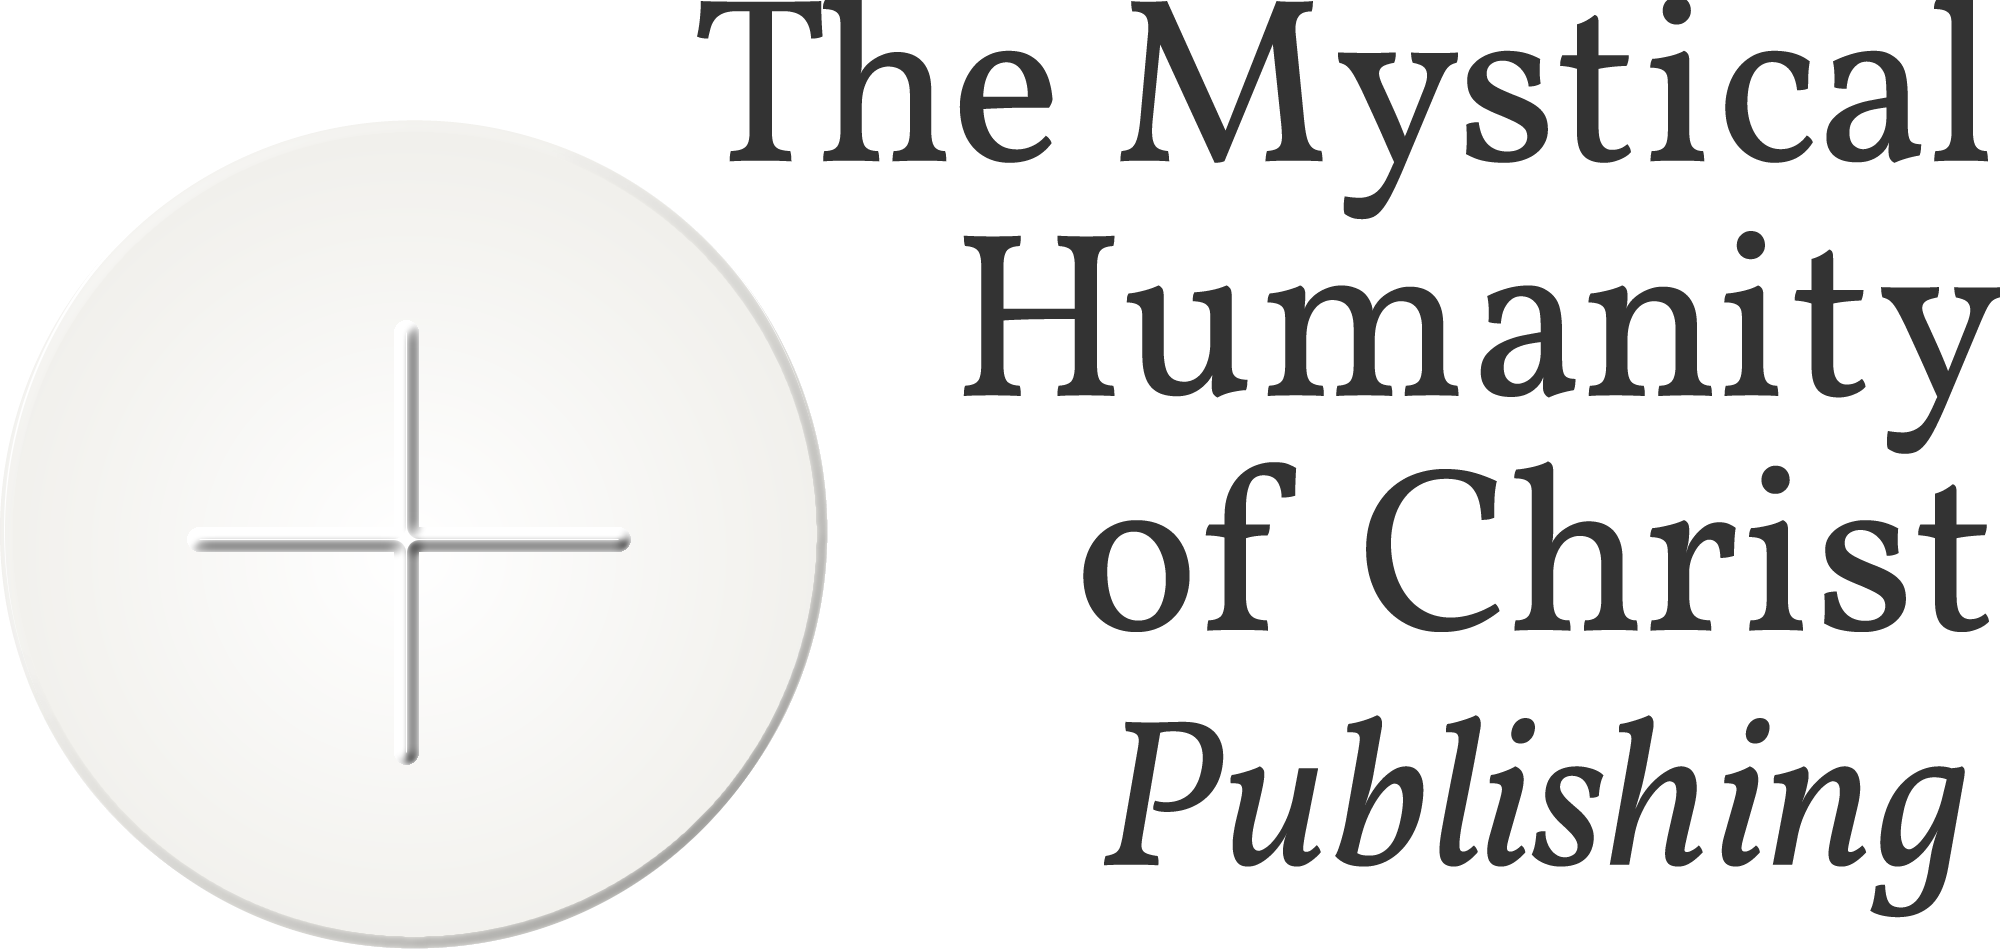 The Mystical Humanity of Christ Publishing